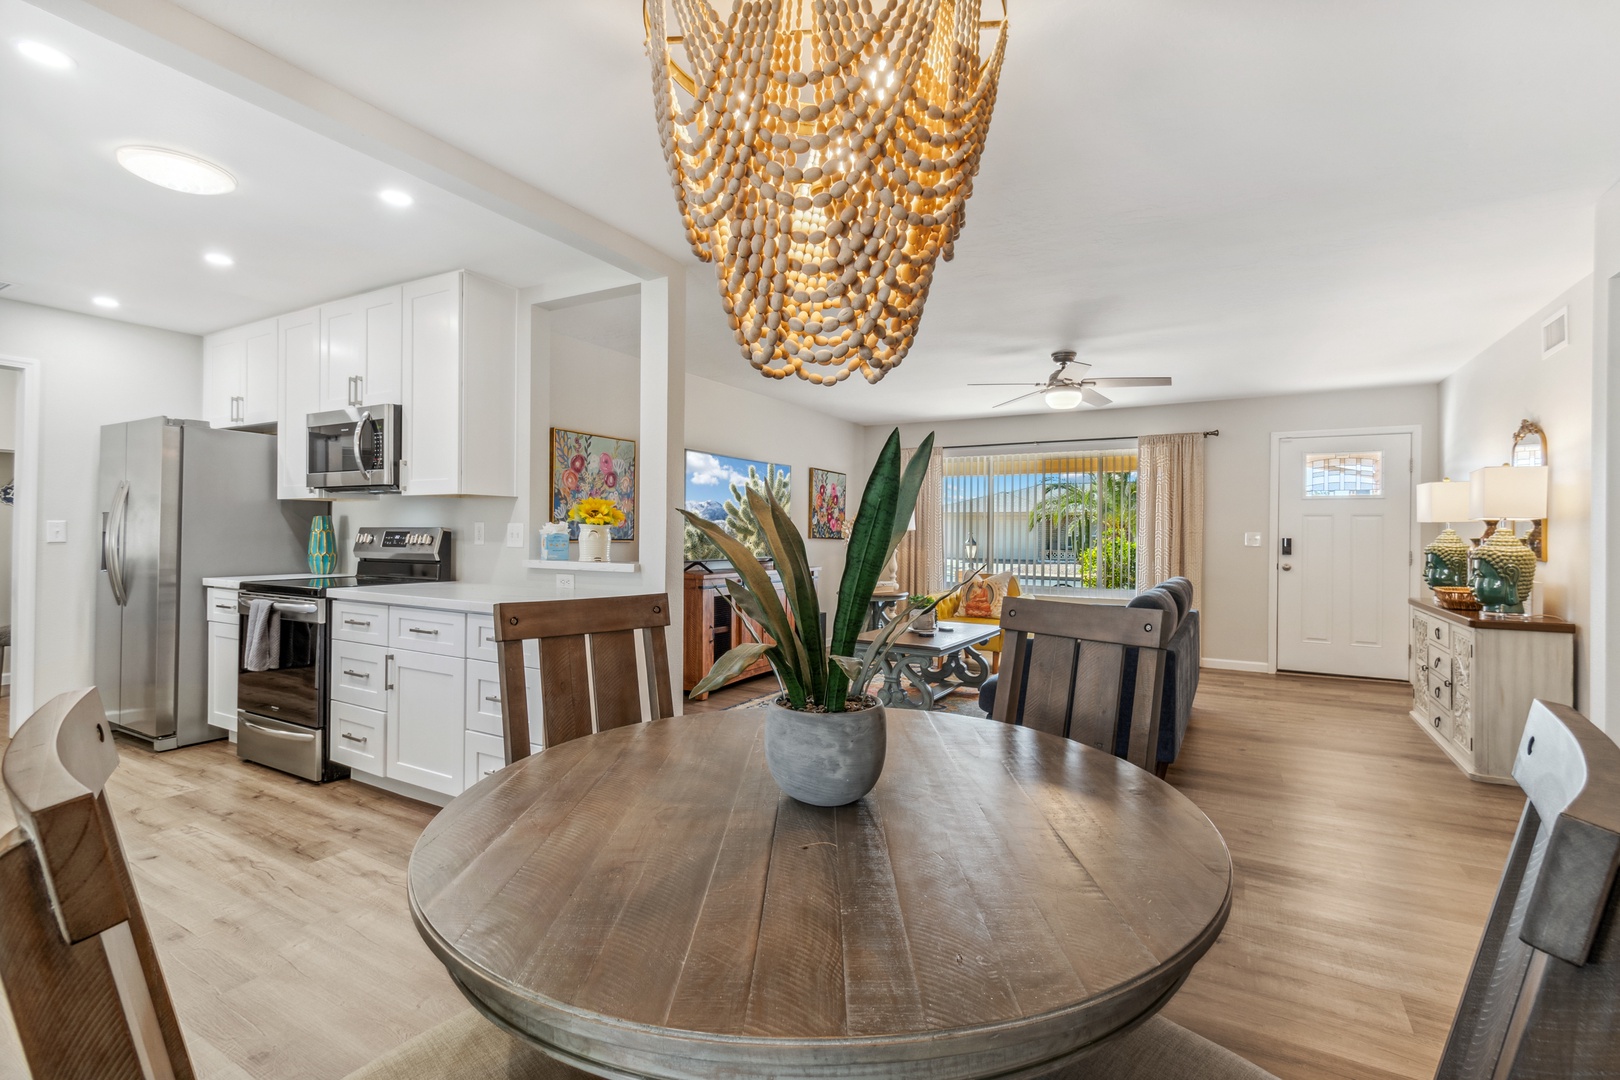 Mesa Vacation Rentals, Private Putting Oasis - The property has been completely updated, with new flooring, countertops, appliances, and much more. You'll love the quartz countertops and new white cabinets in the kitchen, complete with gorgeous hardware